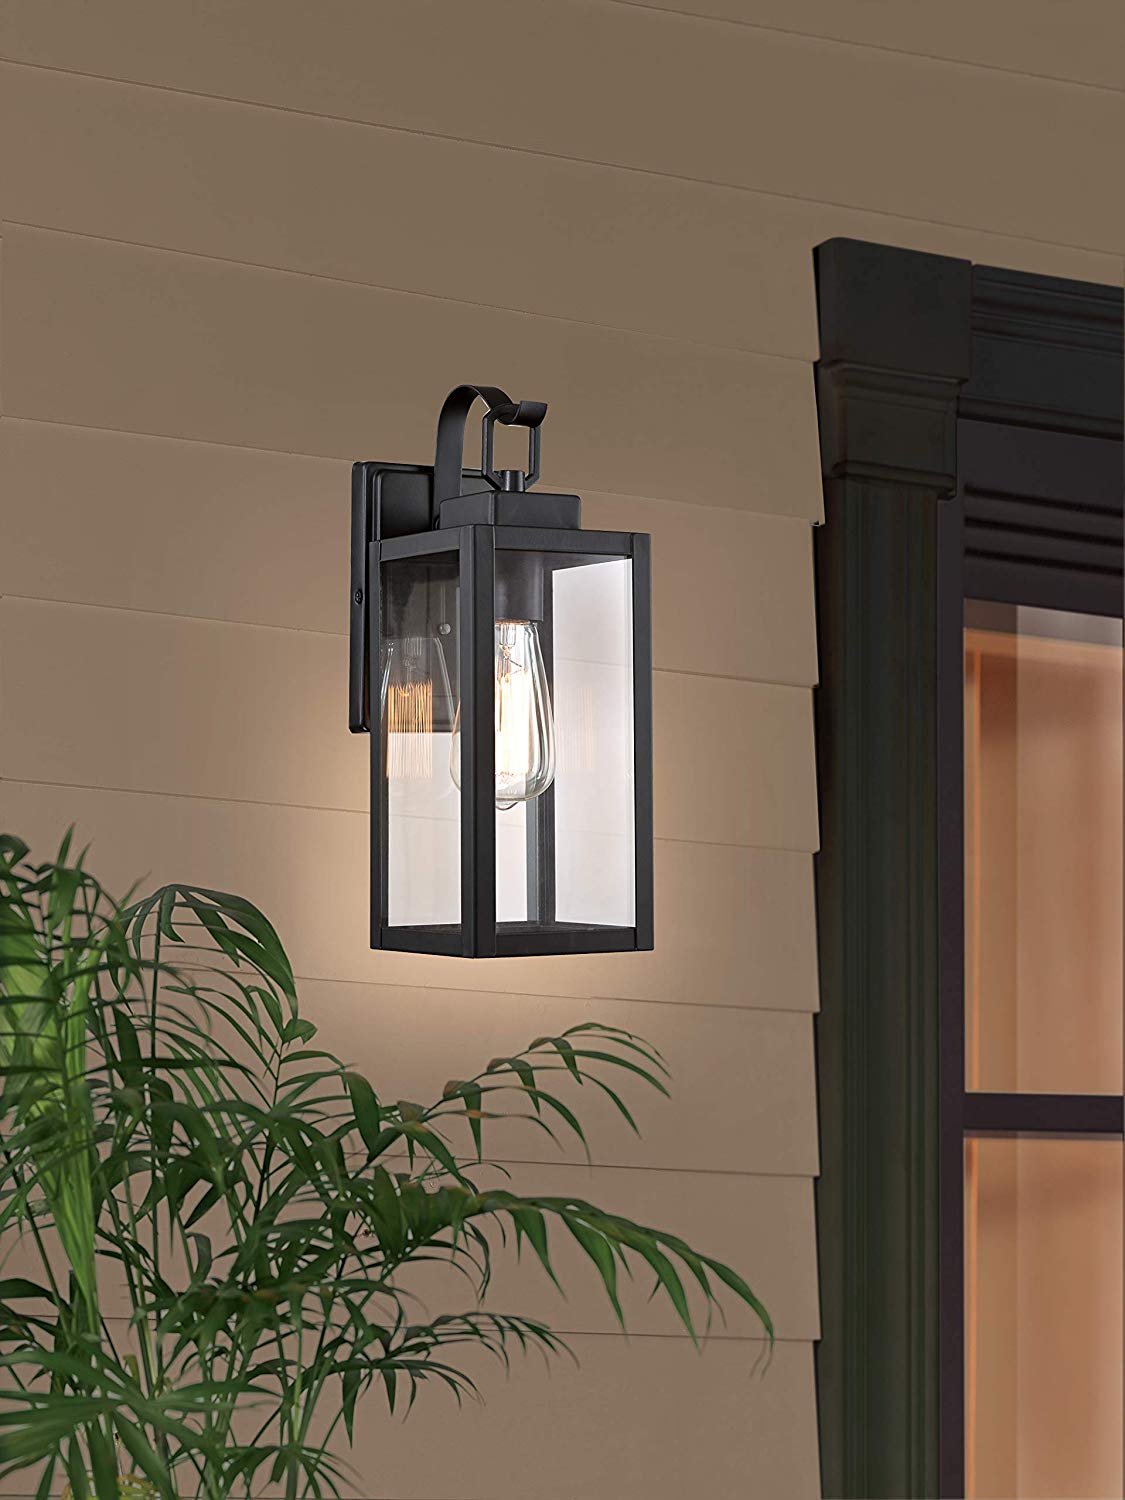 Gruenlich Outdoor Wall Lantern, Wall Sconce Light as Porch Lighting Fixture with One E26 Base Max 100W, Aluminum Housing Plus Glass, Matte Black Finish, ETL Rated